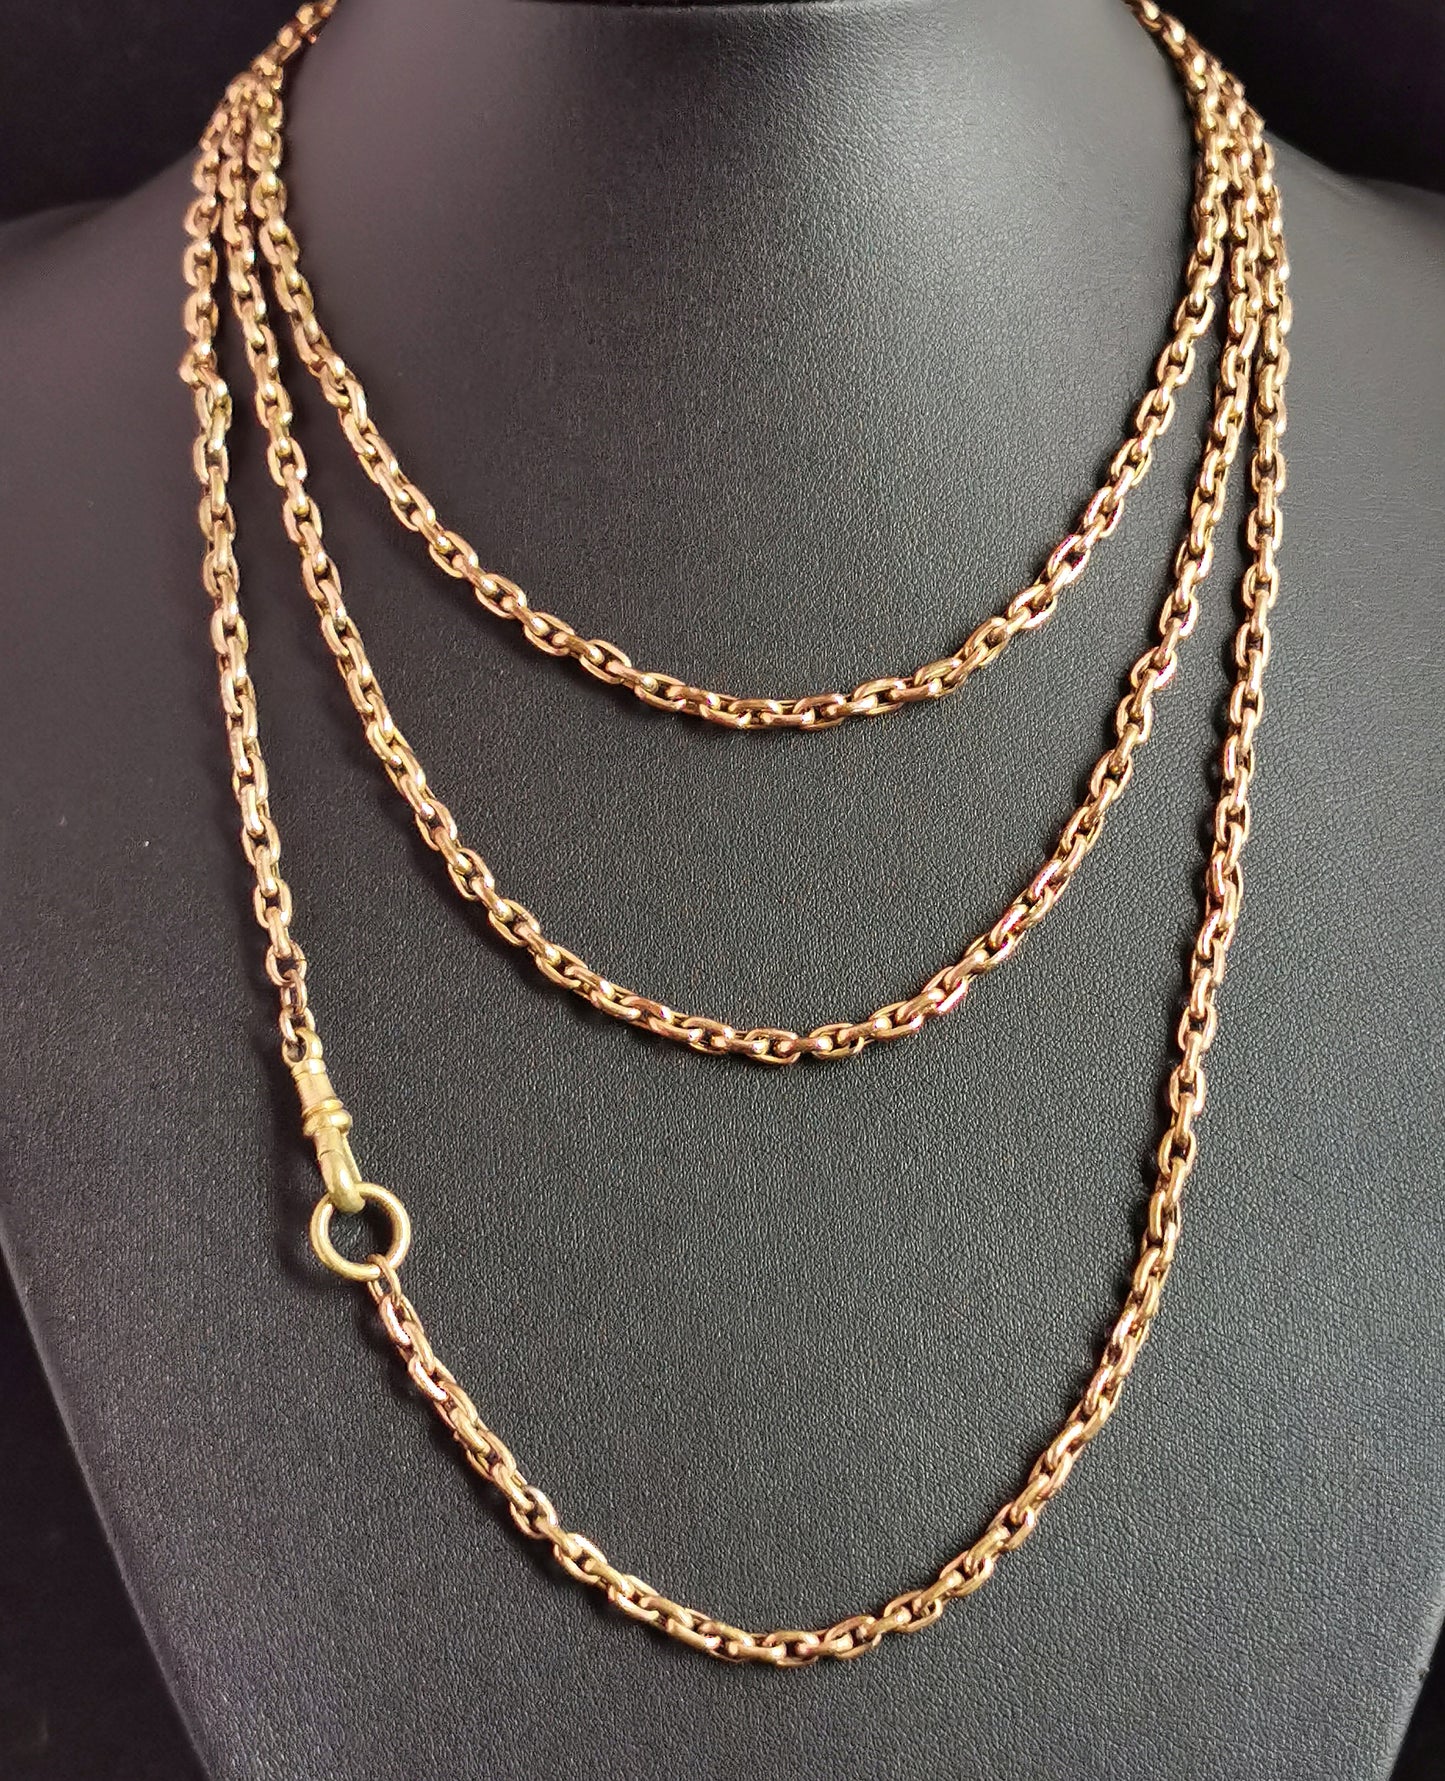 Antique Victorian gold plated longuard chain necklace, muff chain